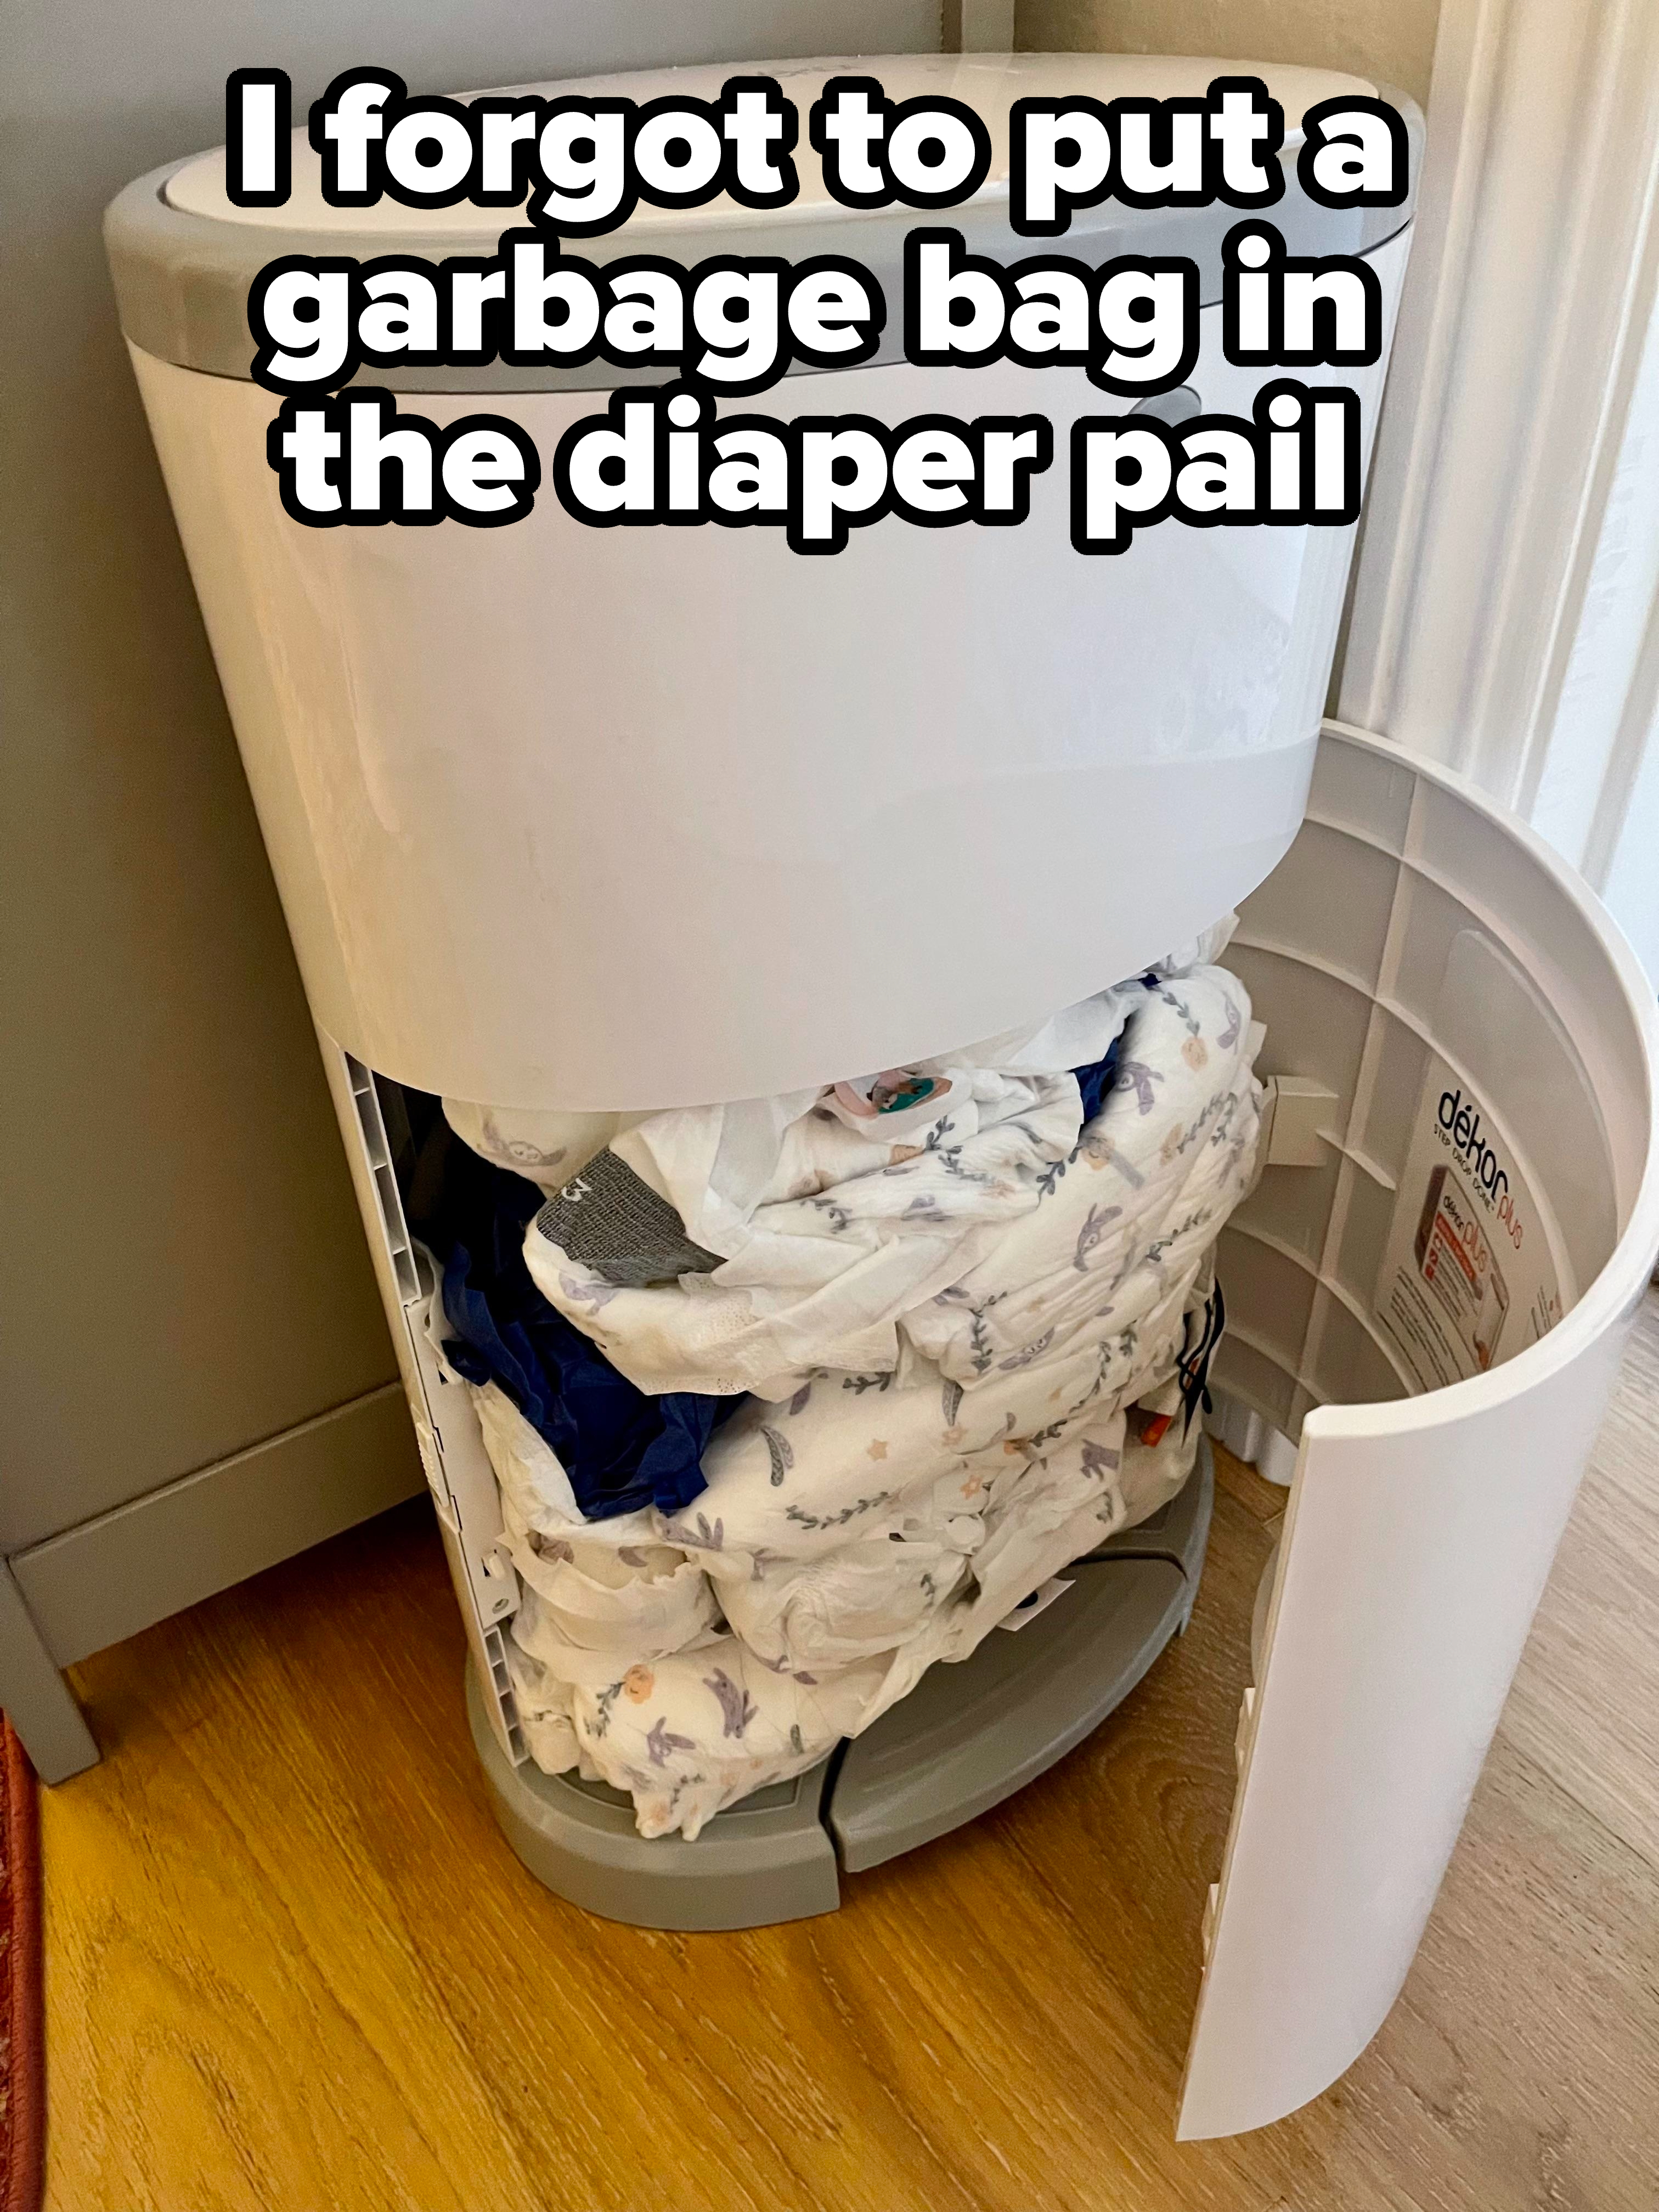 Dirty diapers in a diaper pail